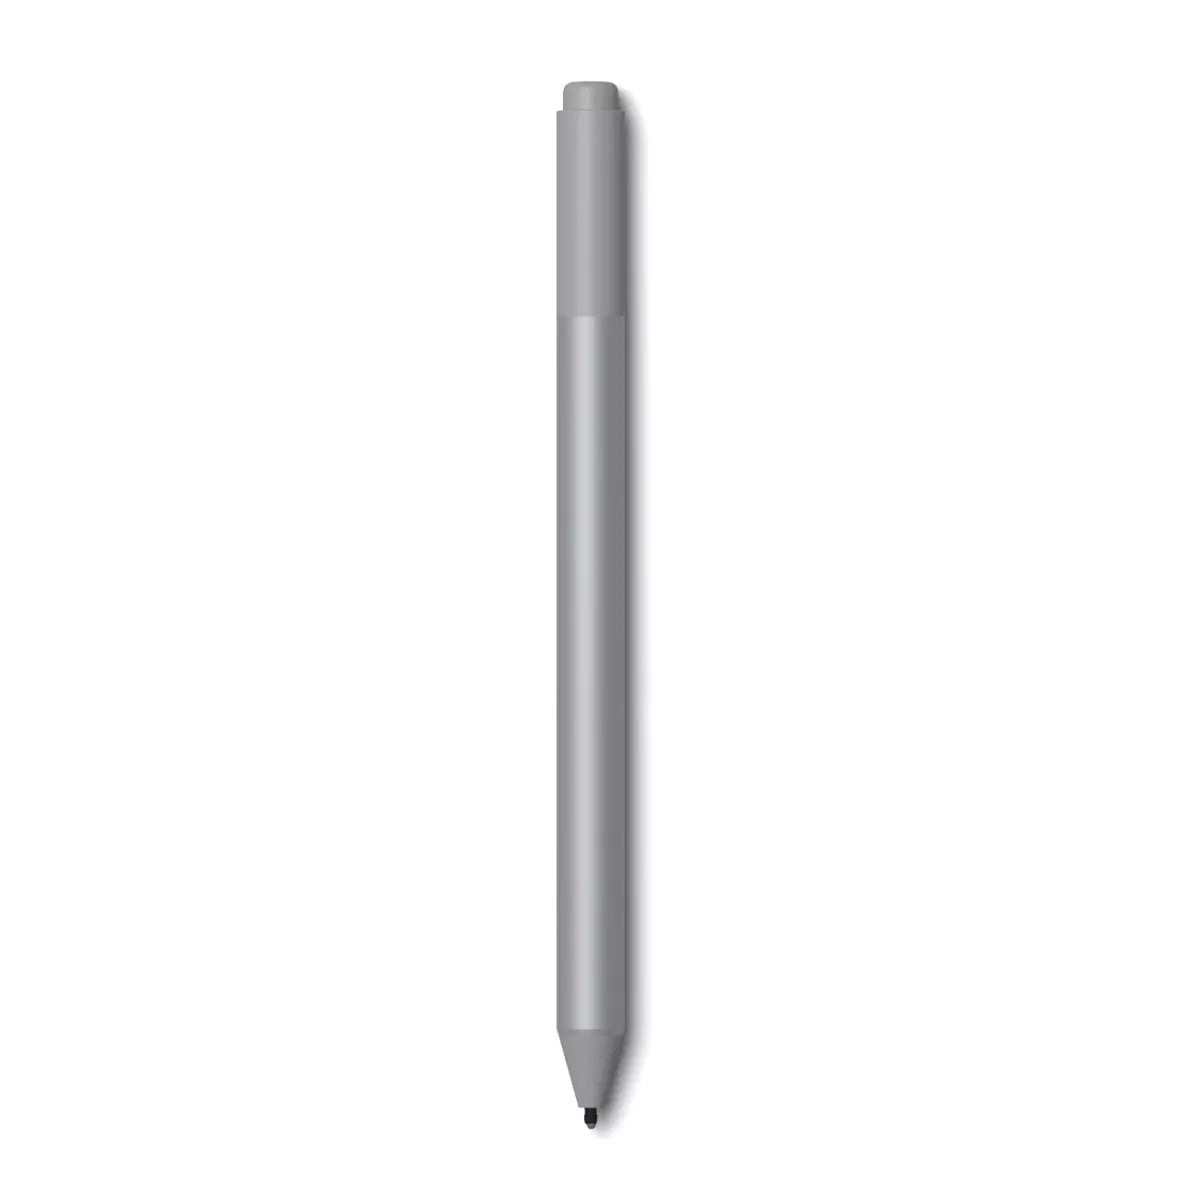 Microsoft Surface Pen Model 1776 Create, design and simplify your creative process all wirelessly